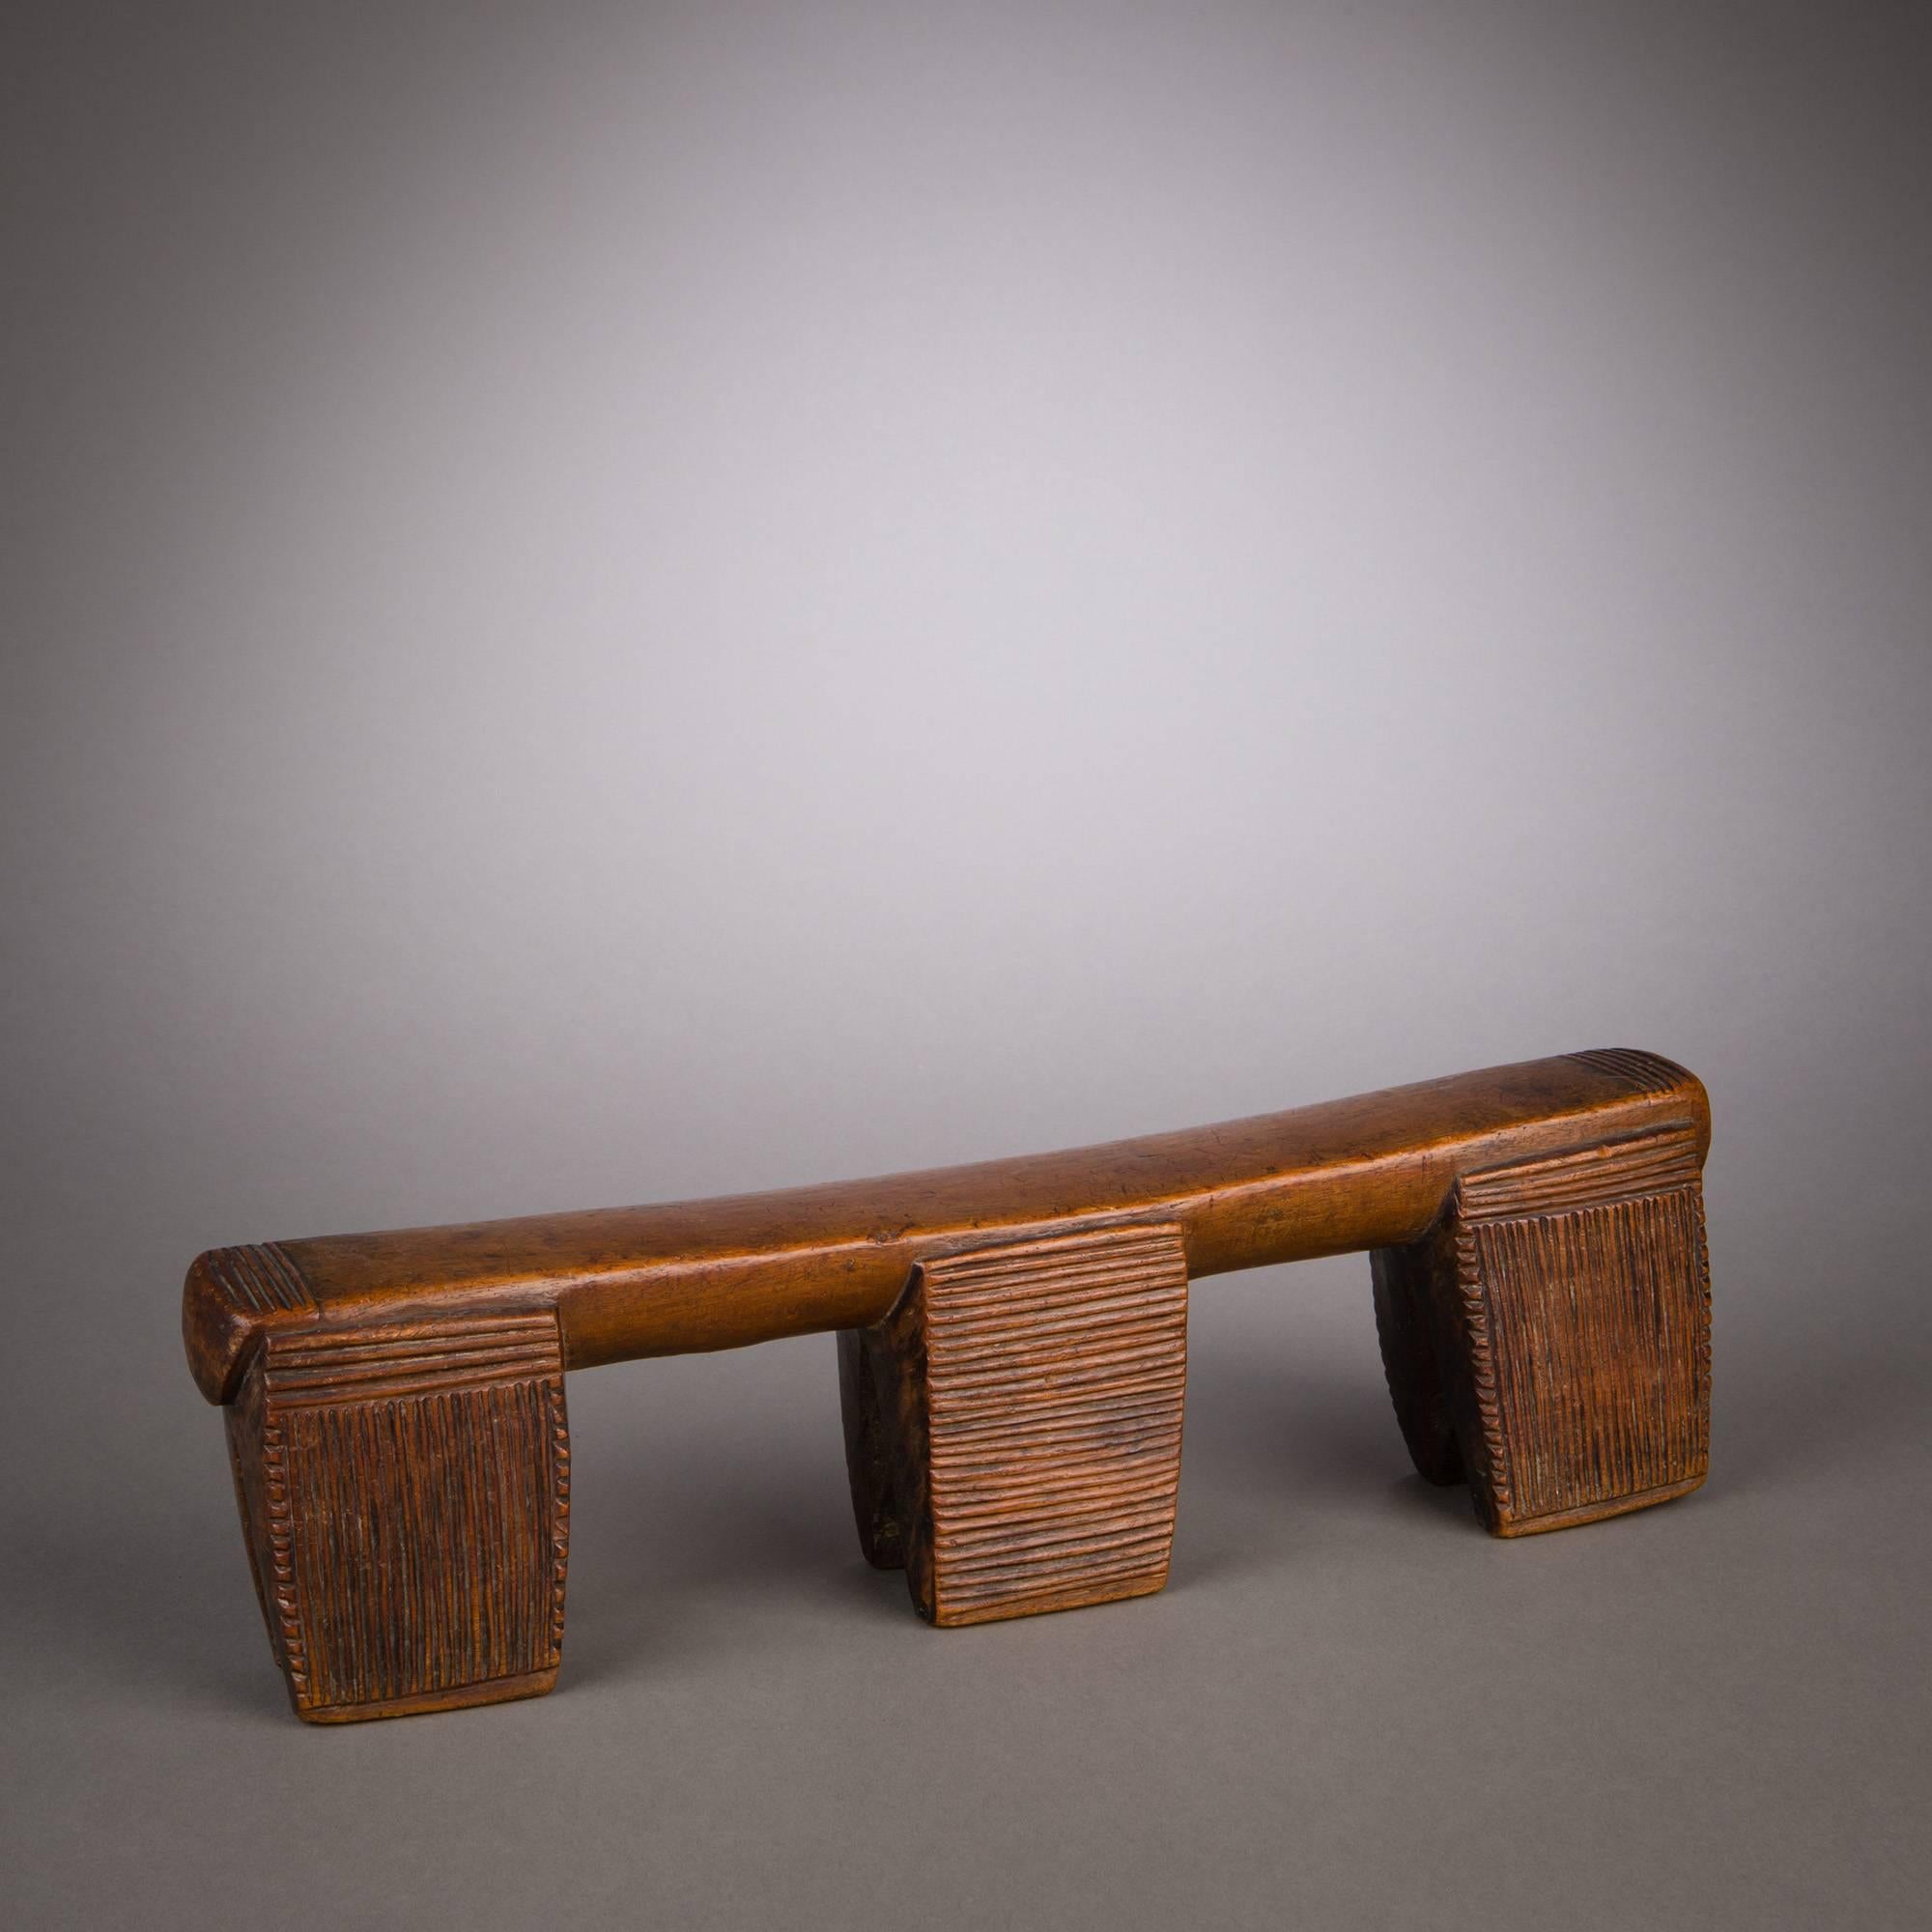 A strong Zulu headrest of Classic, rectilinear design. Six legs support the rest, deployed in three close pairs that appear as blocks or panels when viewed frontally. The particular arrangement of elements in this rest's composition, with its strong